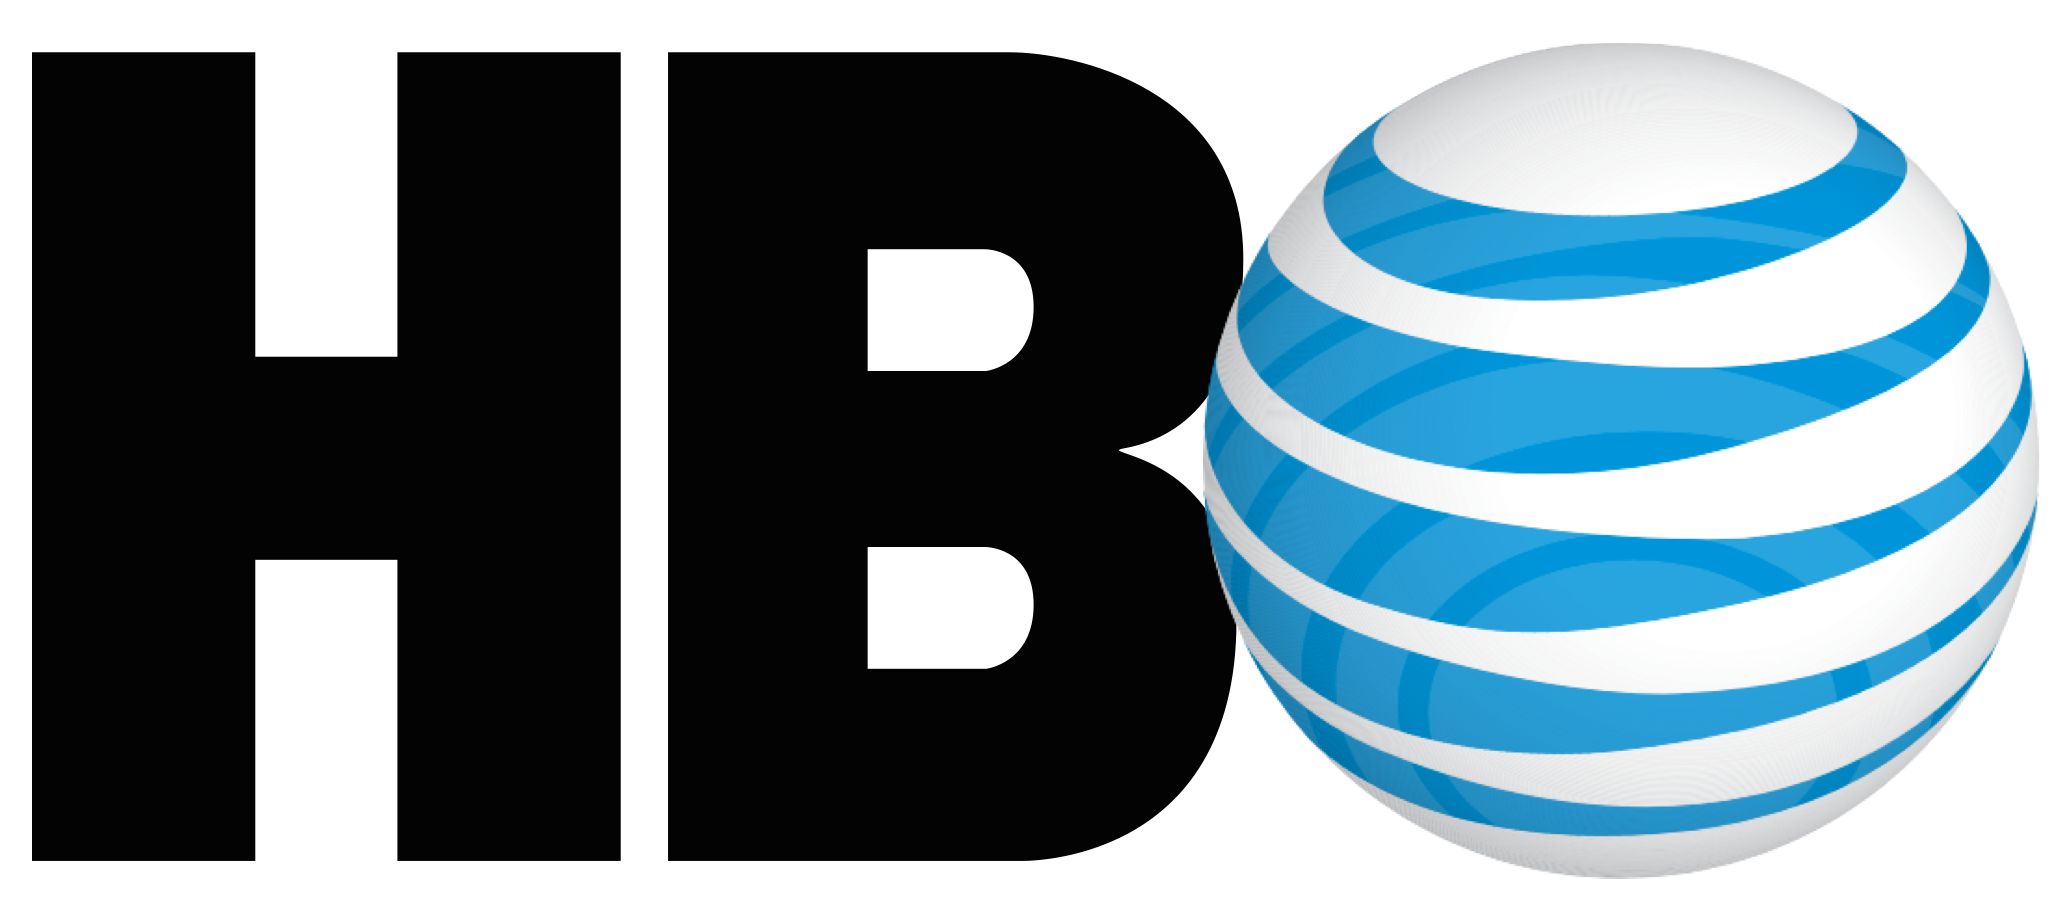 Reports: Possible AT&T/Time Warner Merger Valued At $85 Billion